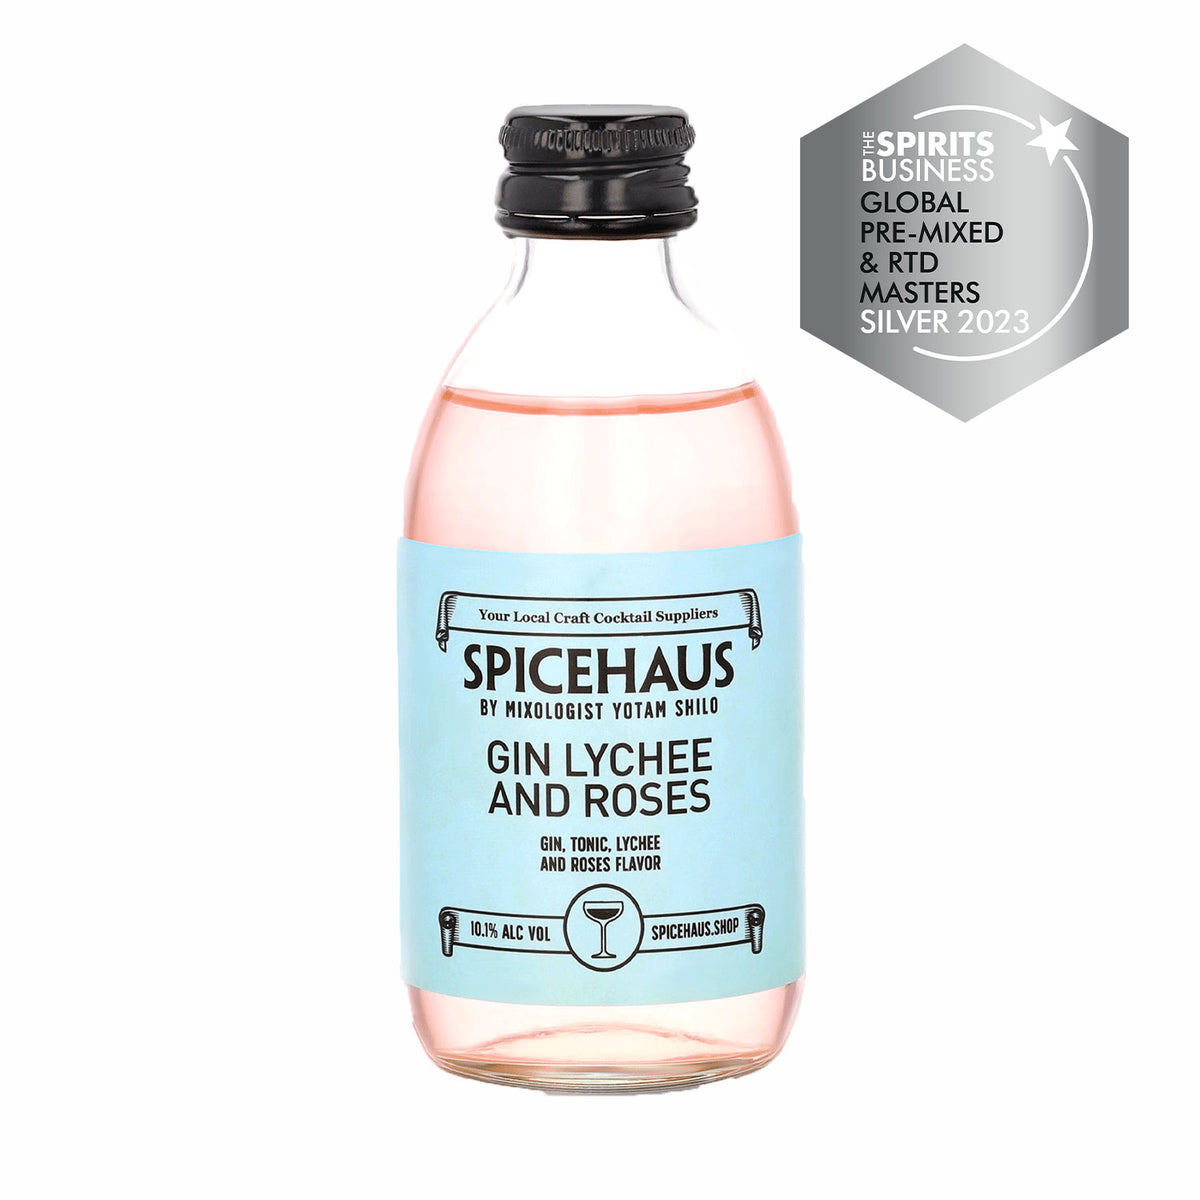 Gin Lychee and Roses 200ml